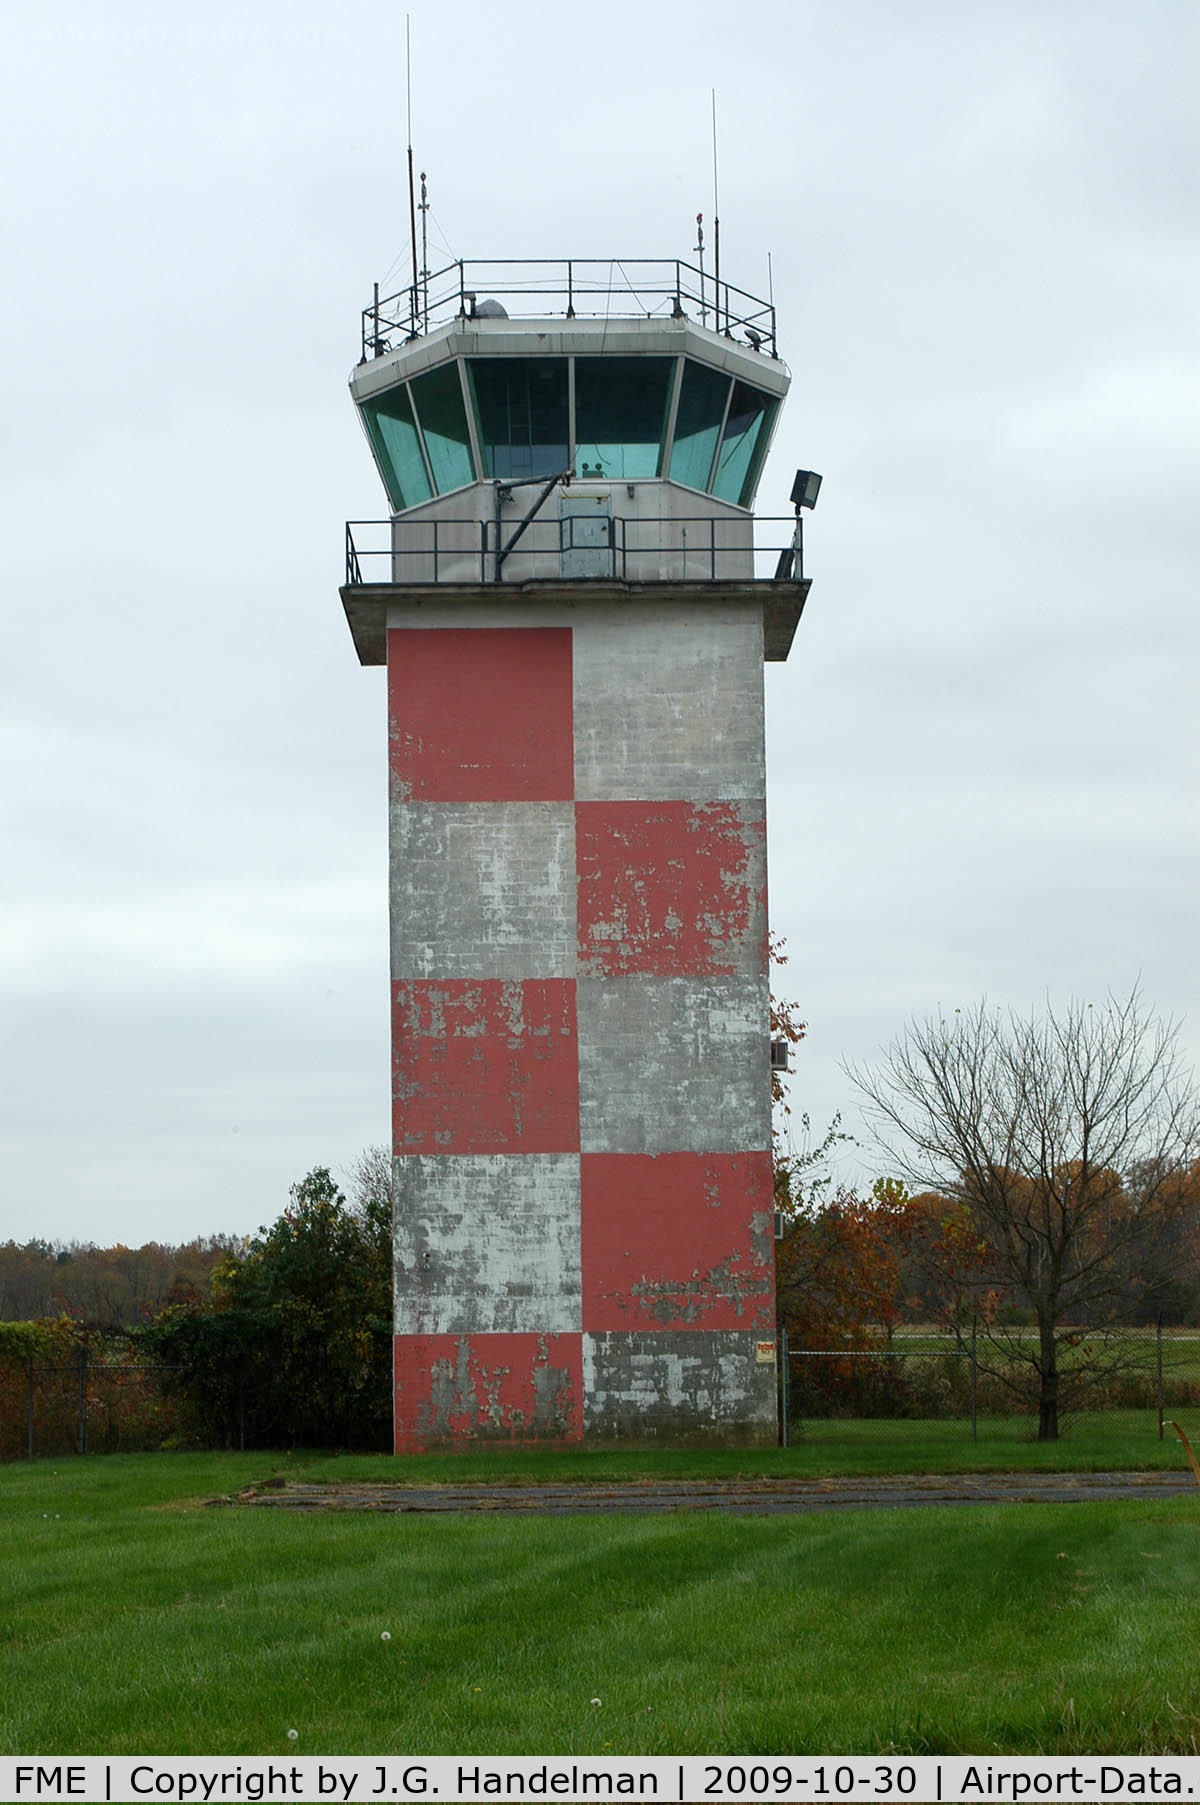 Tipton Airport (FME) - Old Army Air Field tower not in use